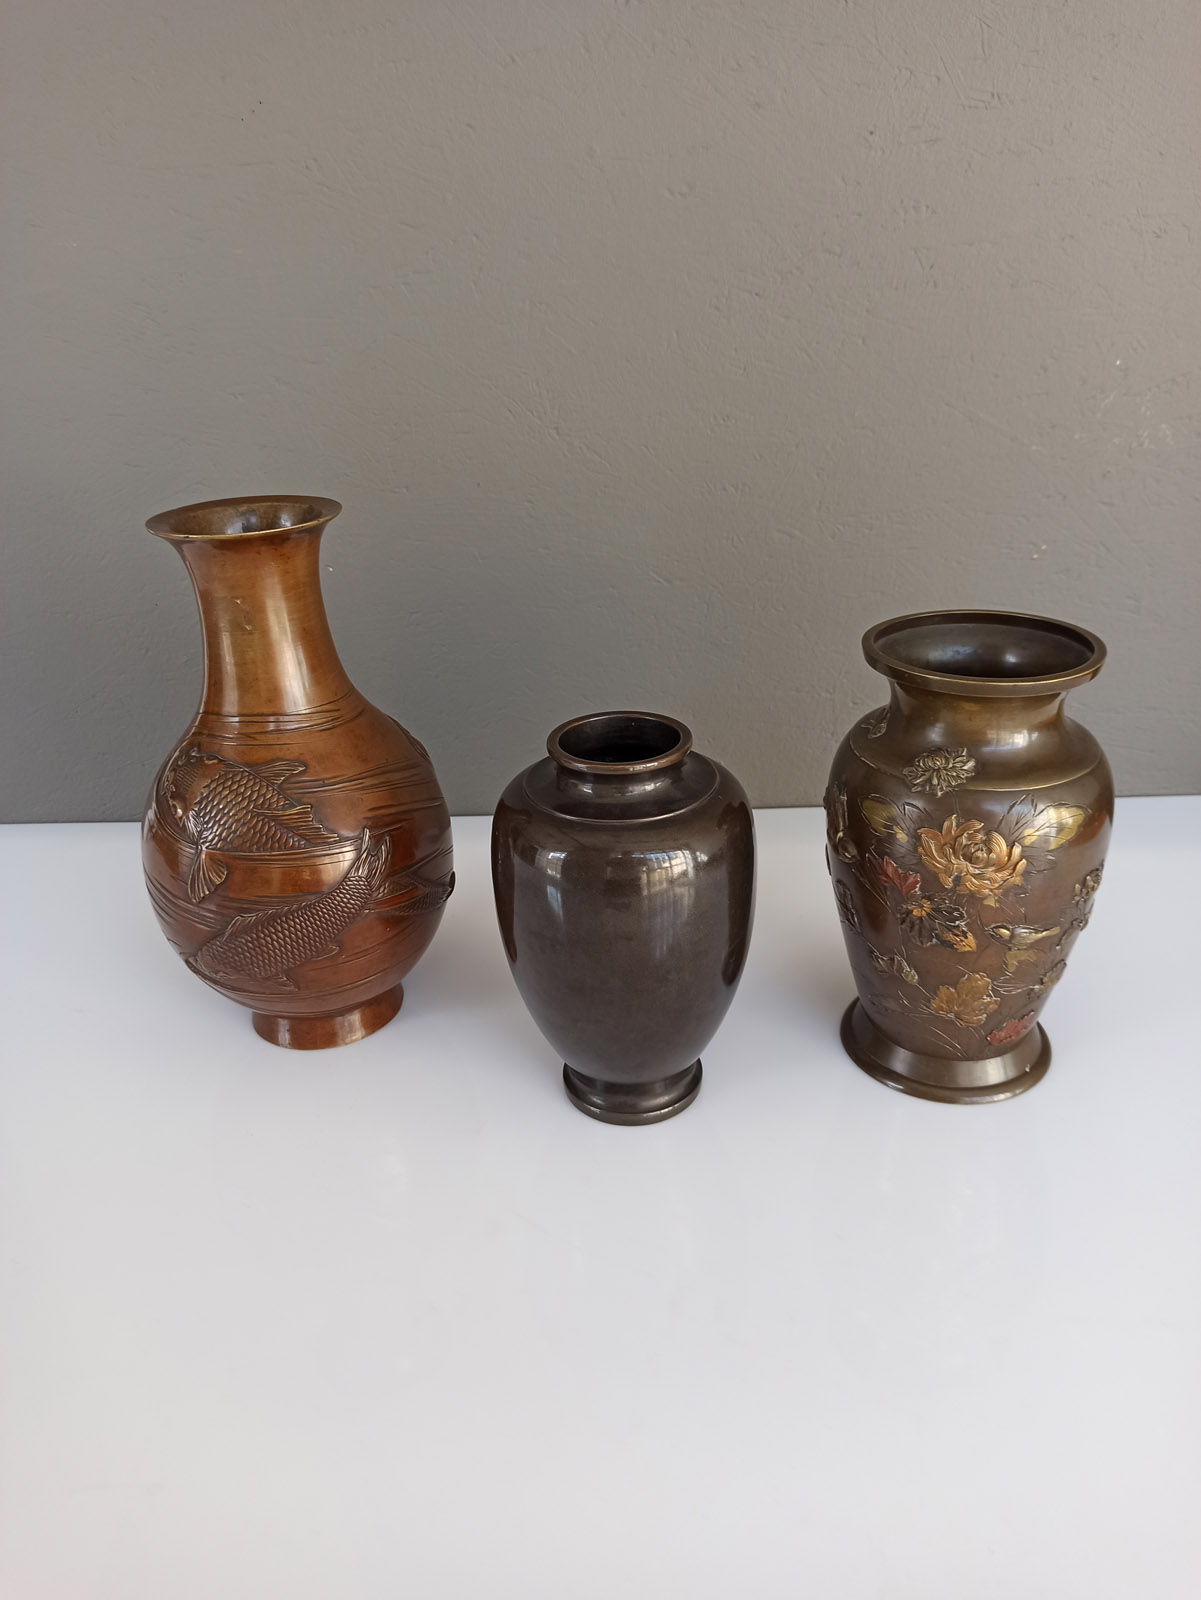 THREE BRONZE VASES AMONG OTHERS DECORATED WITH SPARROWS, AN EAGLE AND CARPS - Image 3 of 4